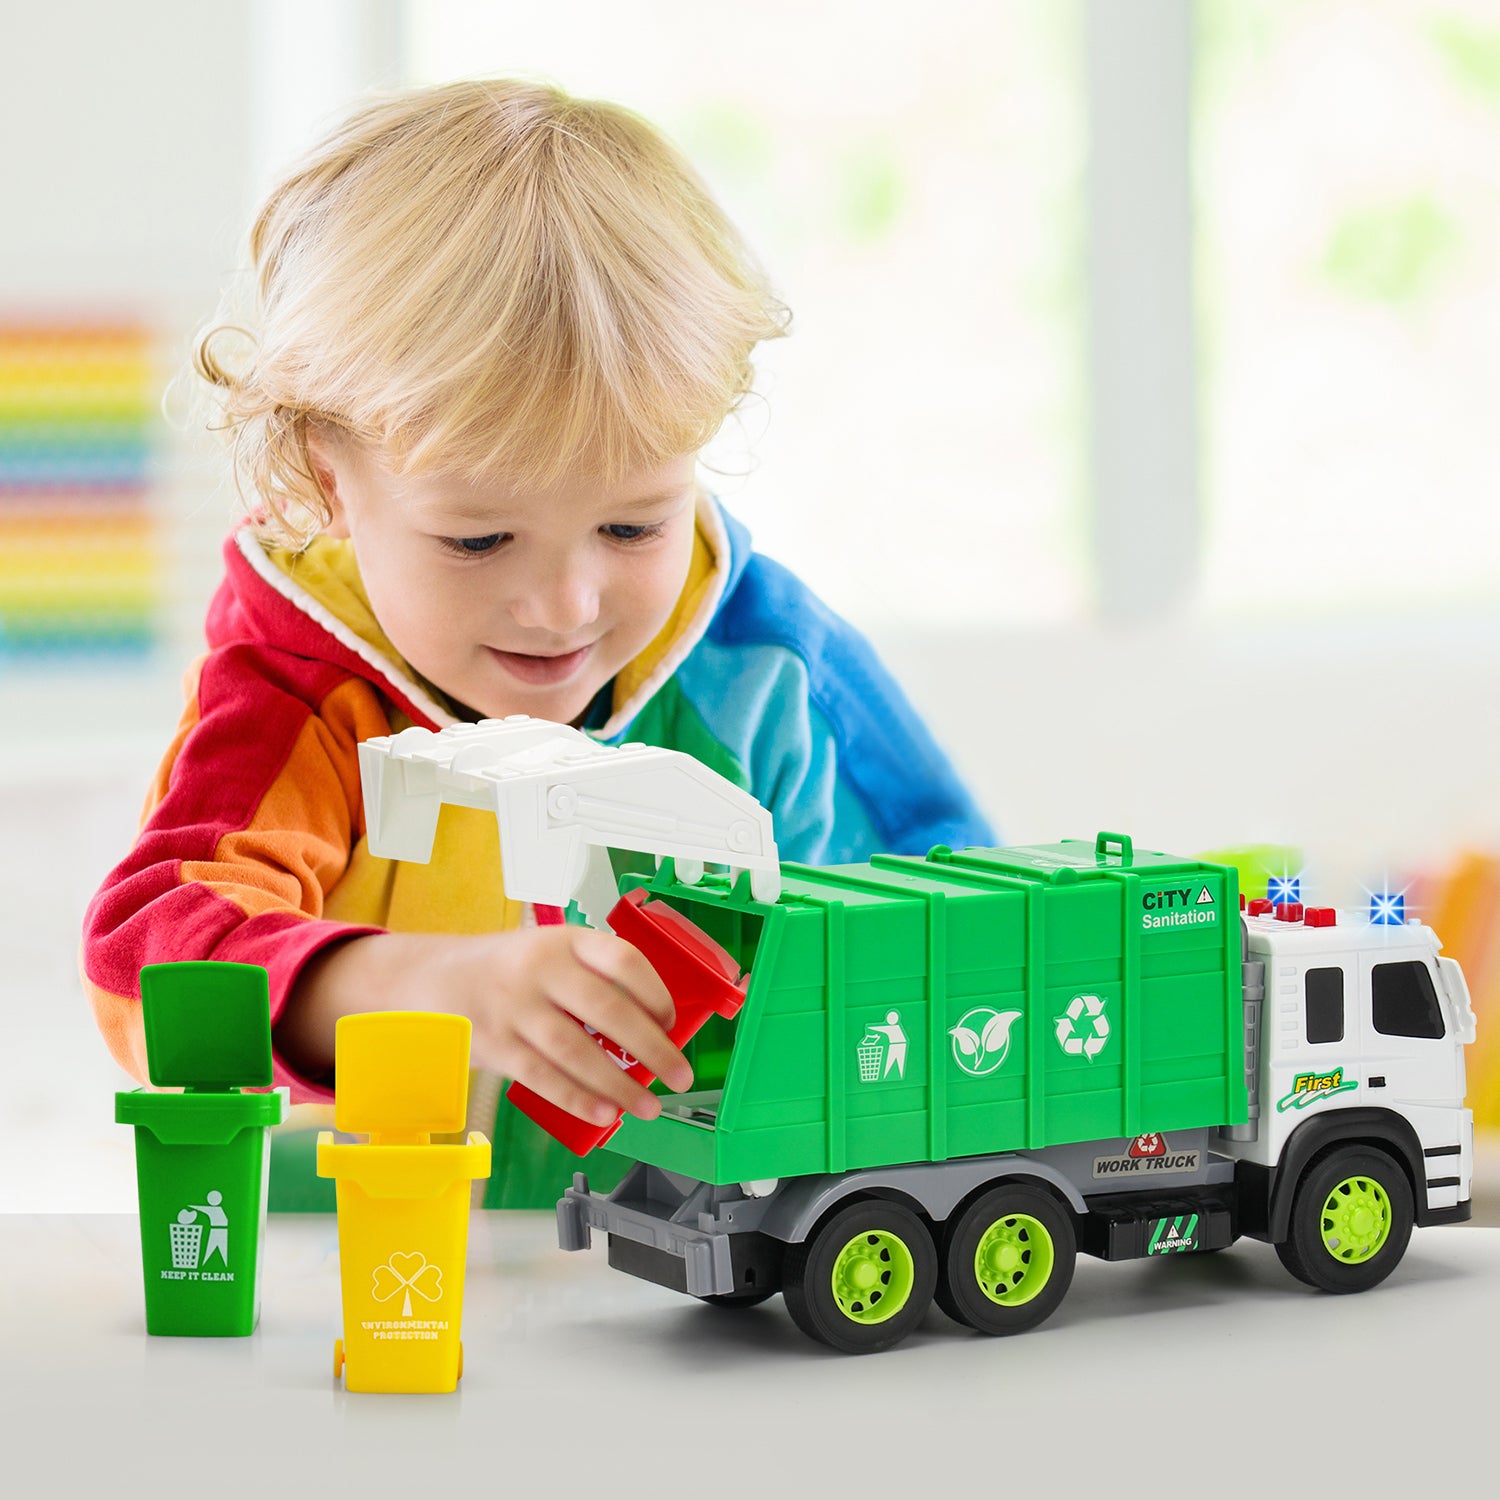 Clover Baby & Kids Garbage Recycling Trucks Two Piece Set, Sleep And Play